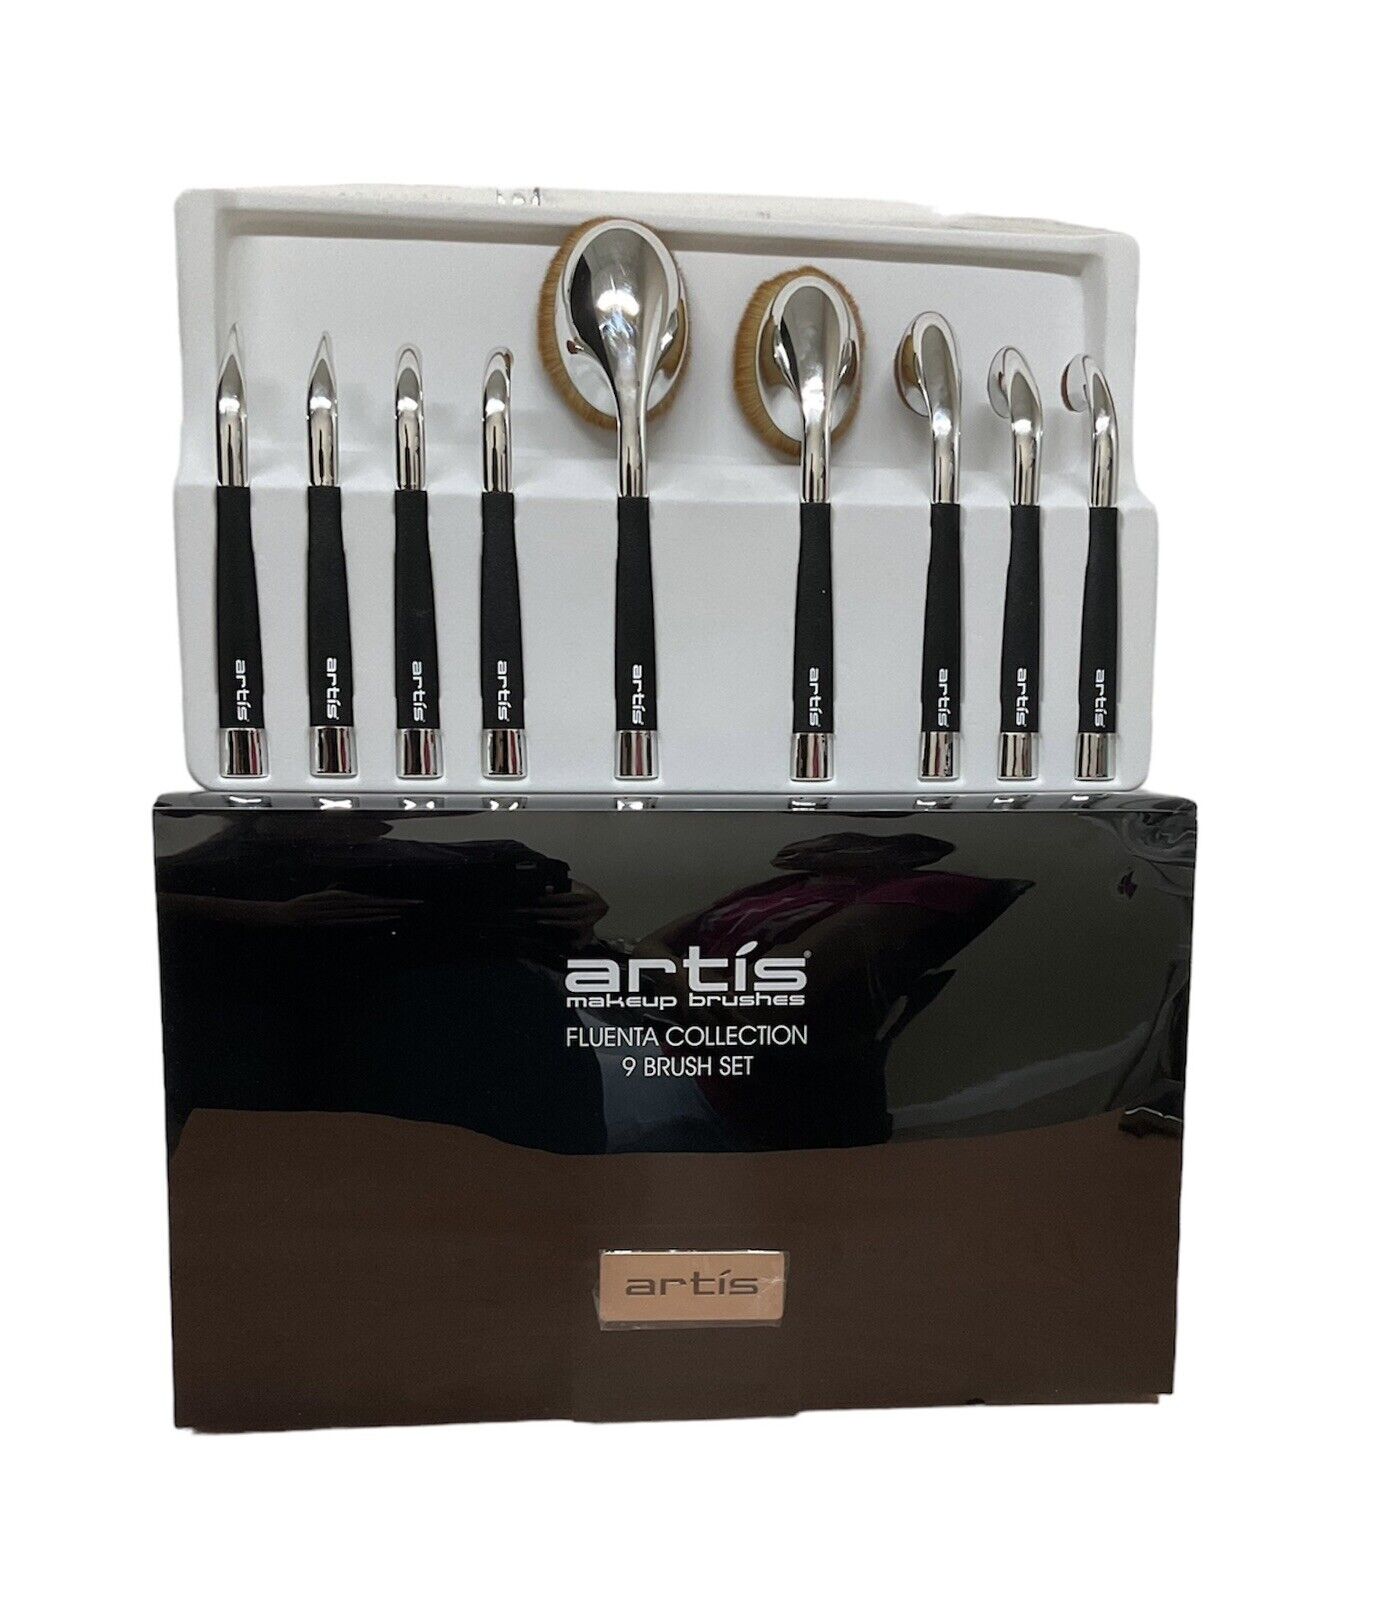 Artis Fluenta Collection 9 BRUSH SET NEW Discontinued As Pictured 